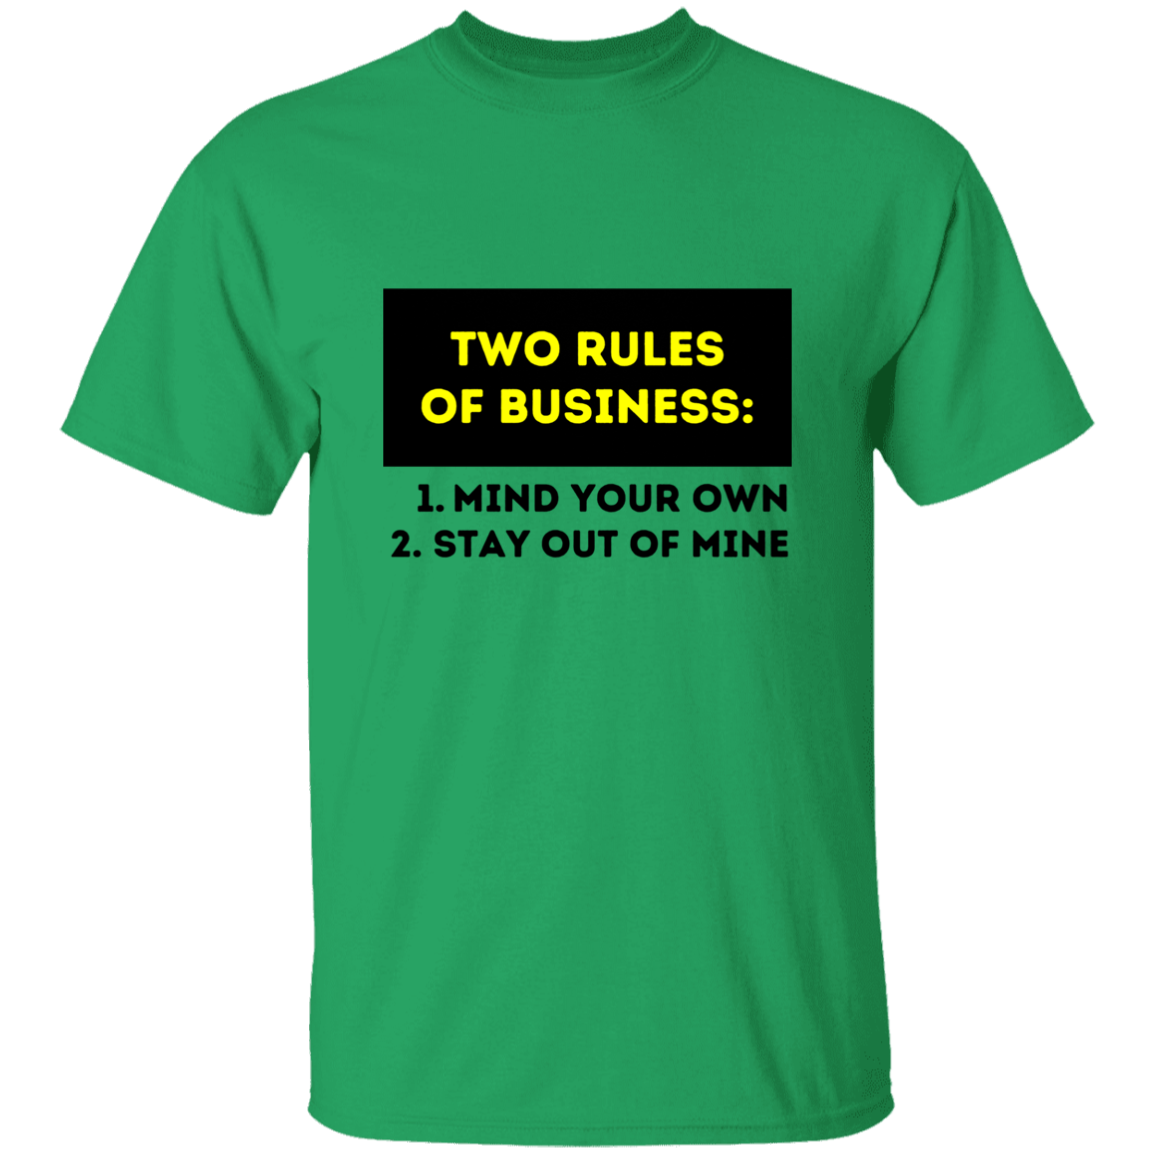 Two Rules of Business 5.3 oz. T-Shirt